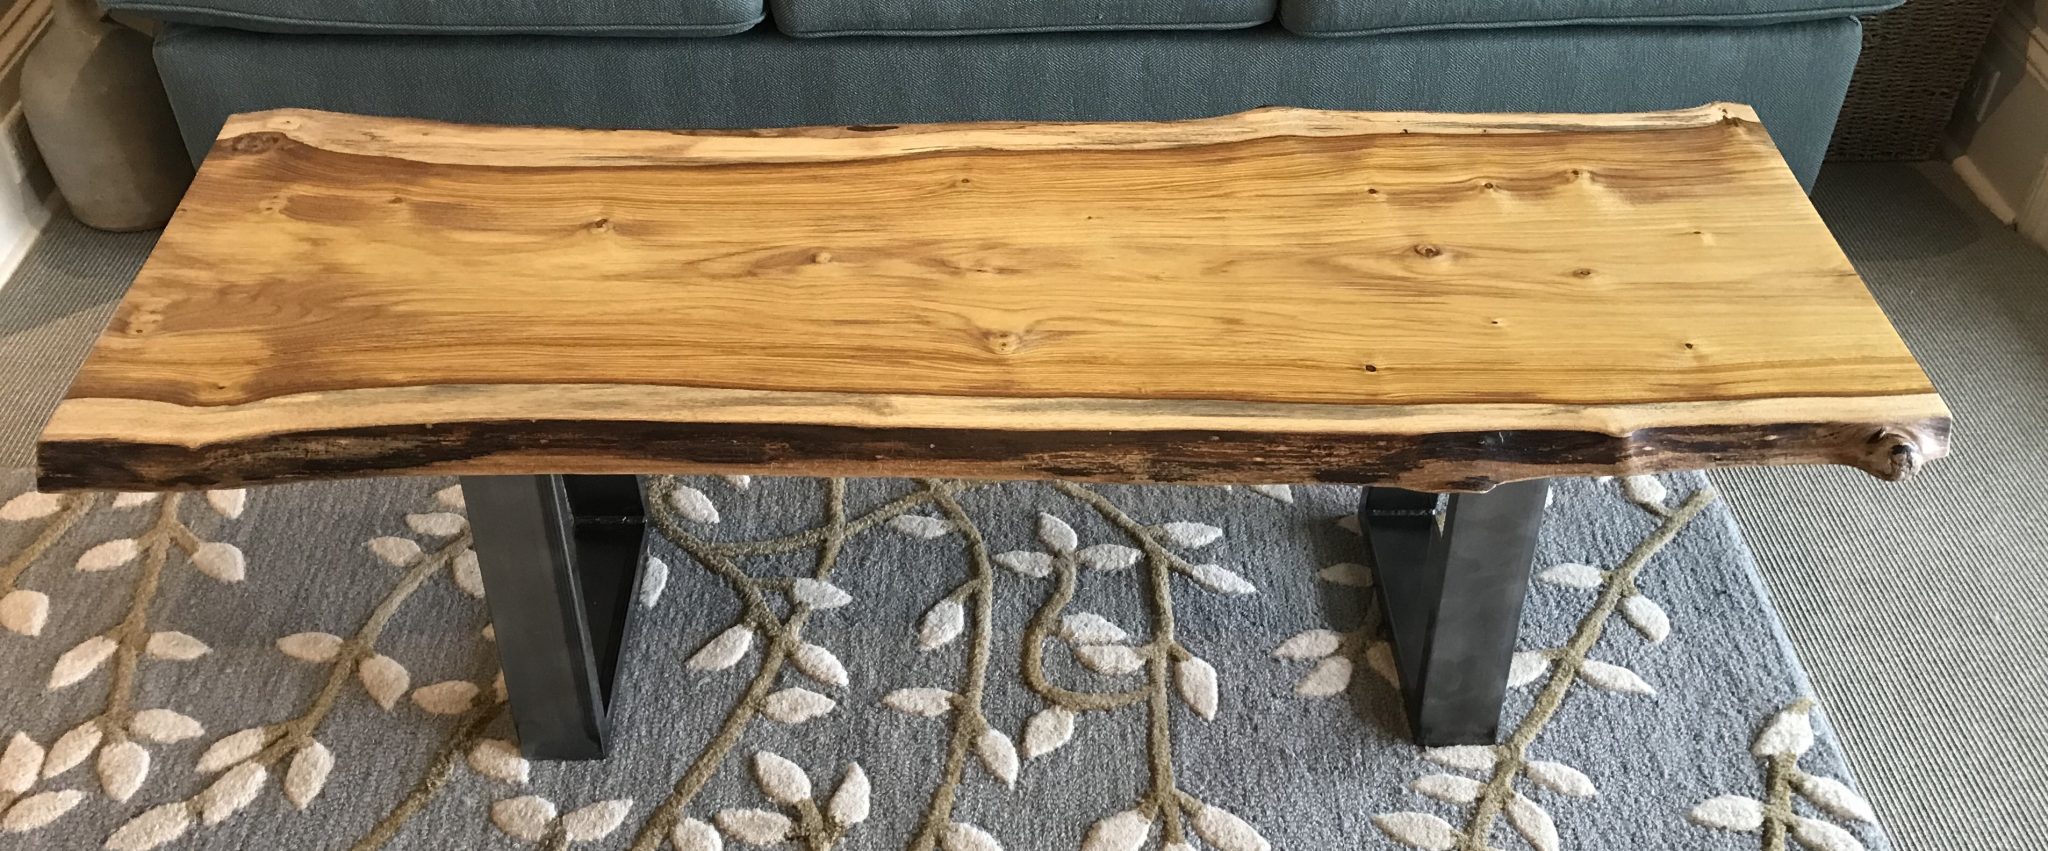 Live edge table in Canary Wood. 55”l x 18”d x 16”h.  Osmo Polyx Oil finish.